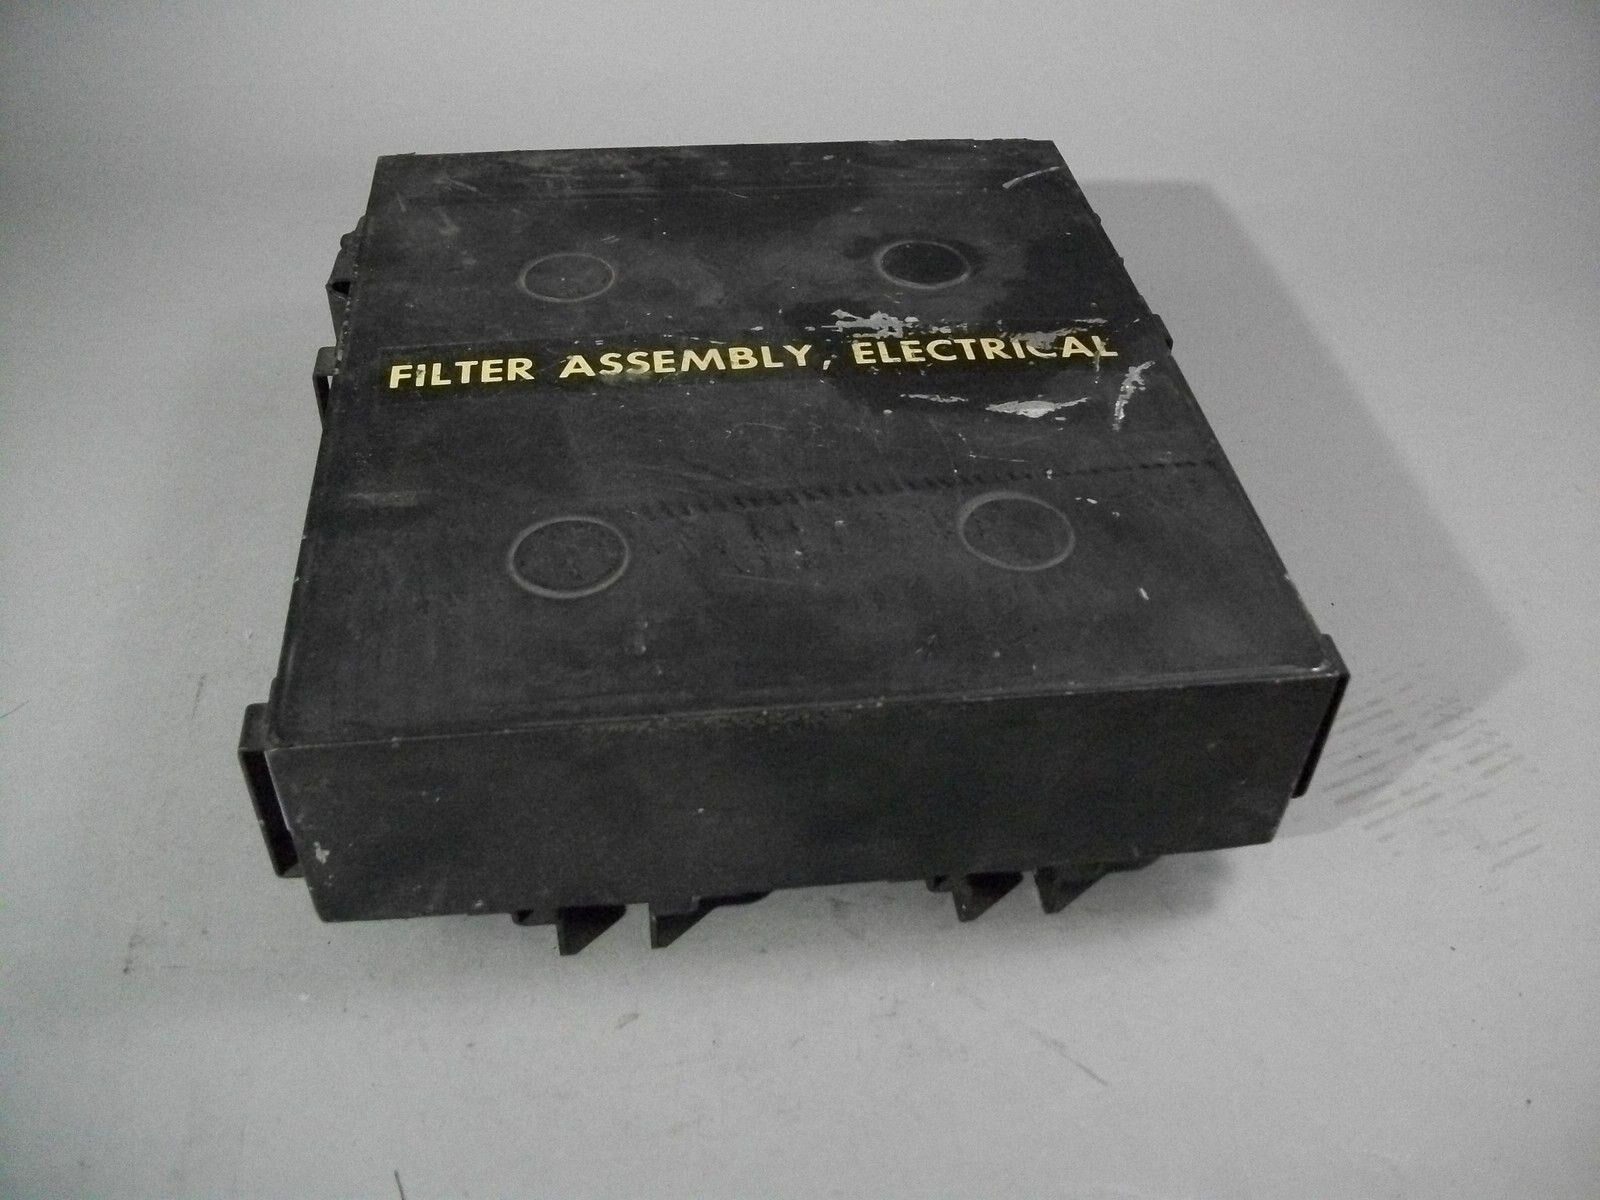 Military Electrical Filter Assembly Movie Stage Prop F-316a/u - 2.9 To 3.1 Ghz.